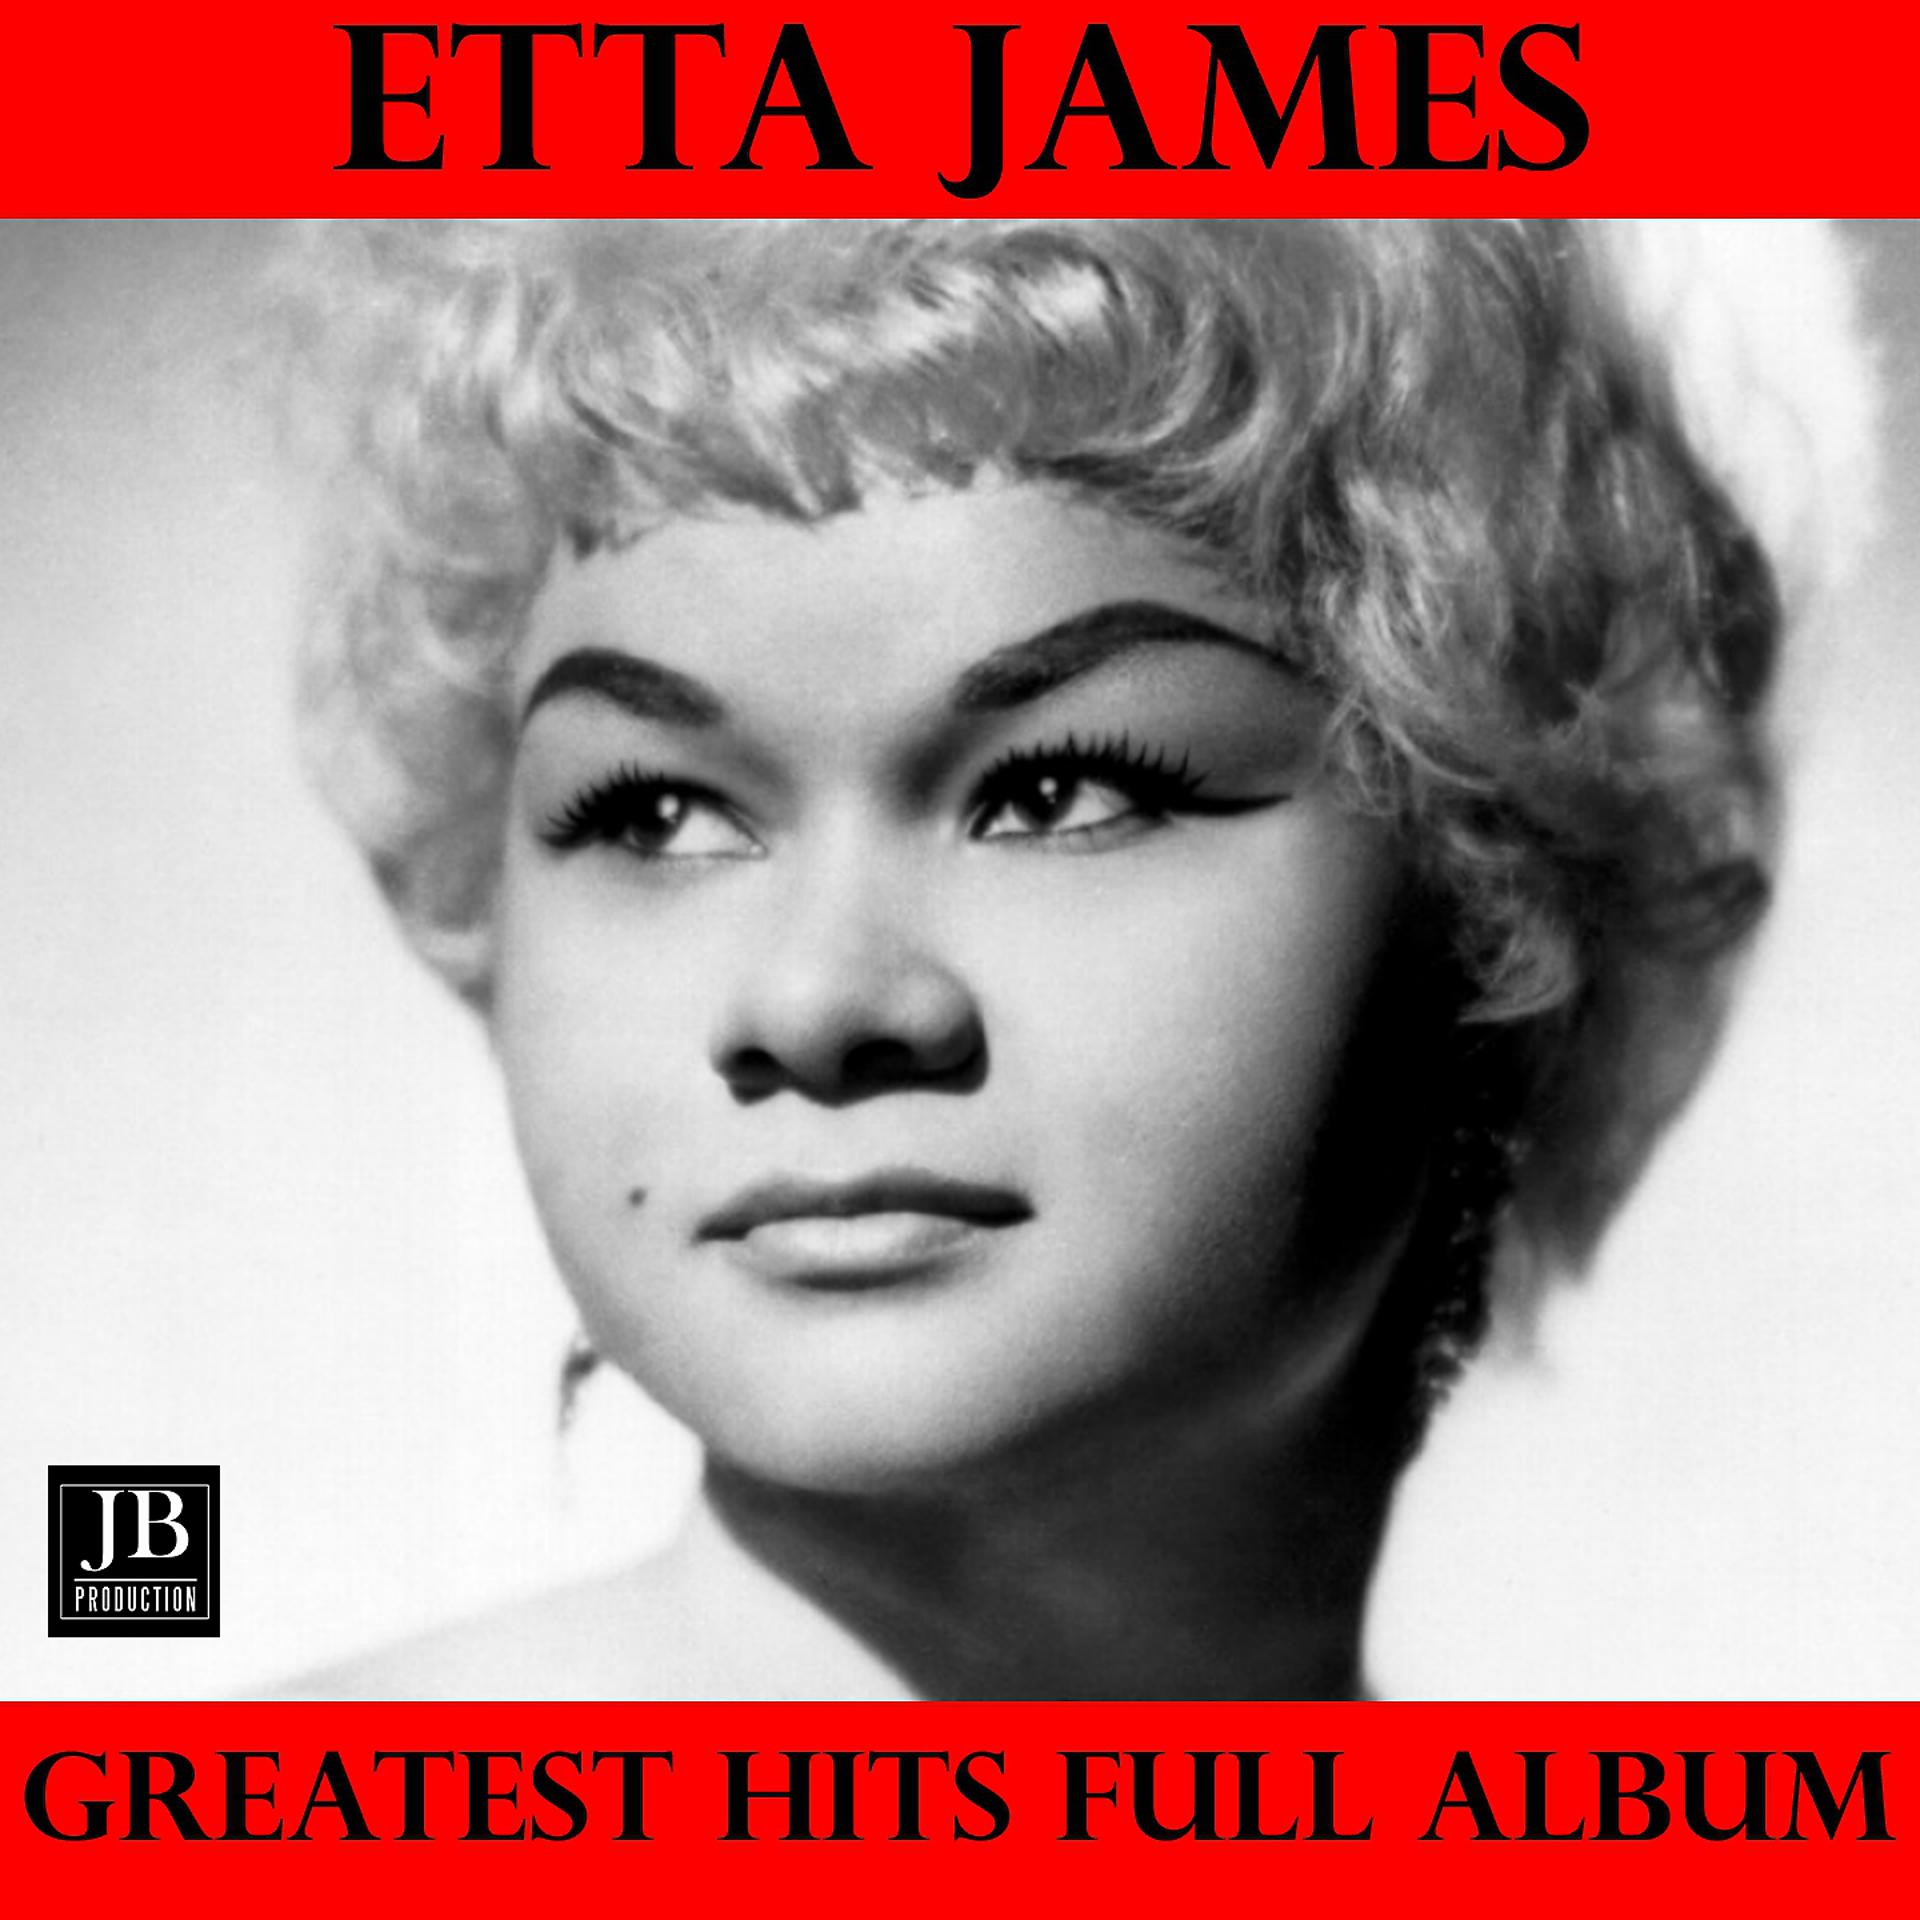 Постер альбома Etta James Greatest Hits Full Album: I Just Want To Make Love To You / A Sunday Kind Of Love / All I Could Do Was Cry / Trust In Me / Stormy Weather / My Dearest Darling / Something's Got a Hold on Me / At Last / Fool That I Am / Tough Mary / W-O-M-A-N /